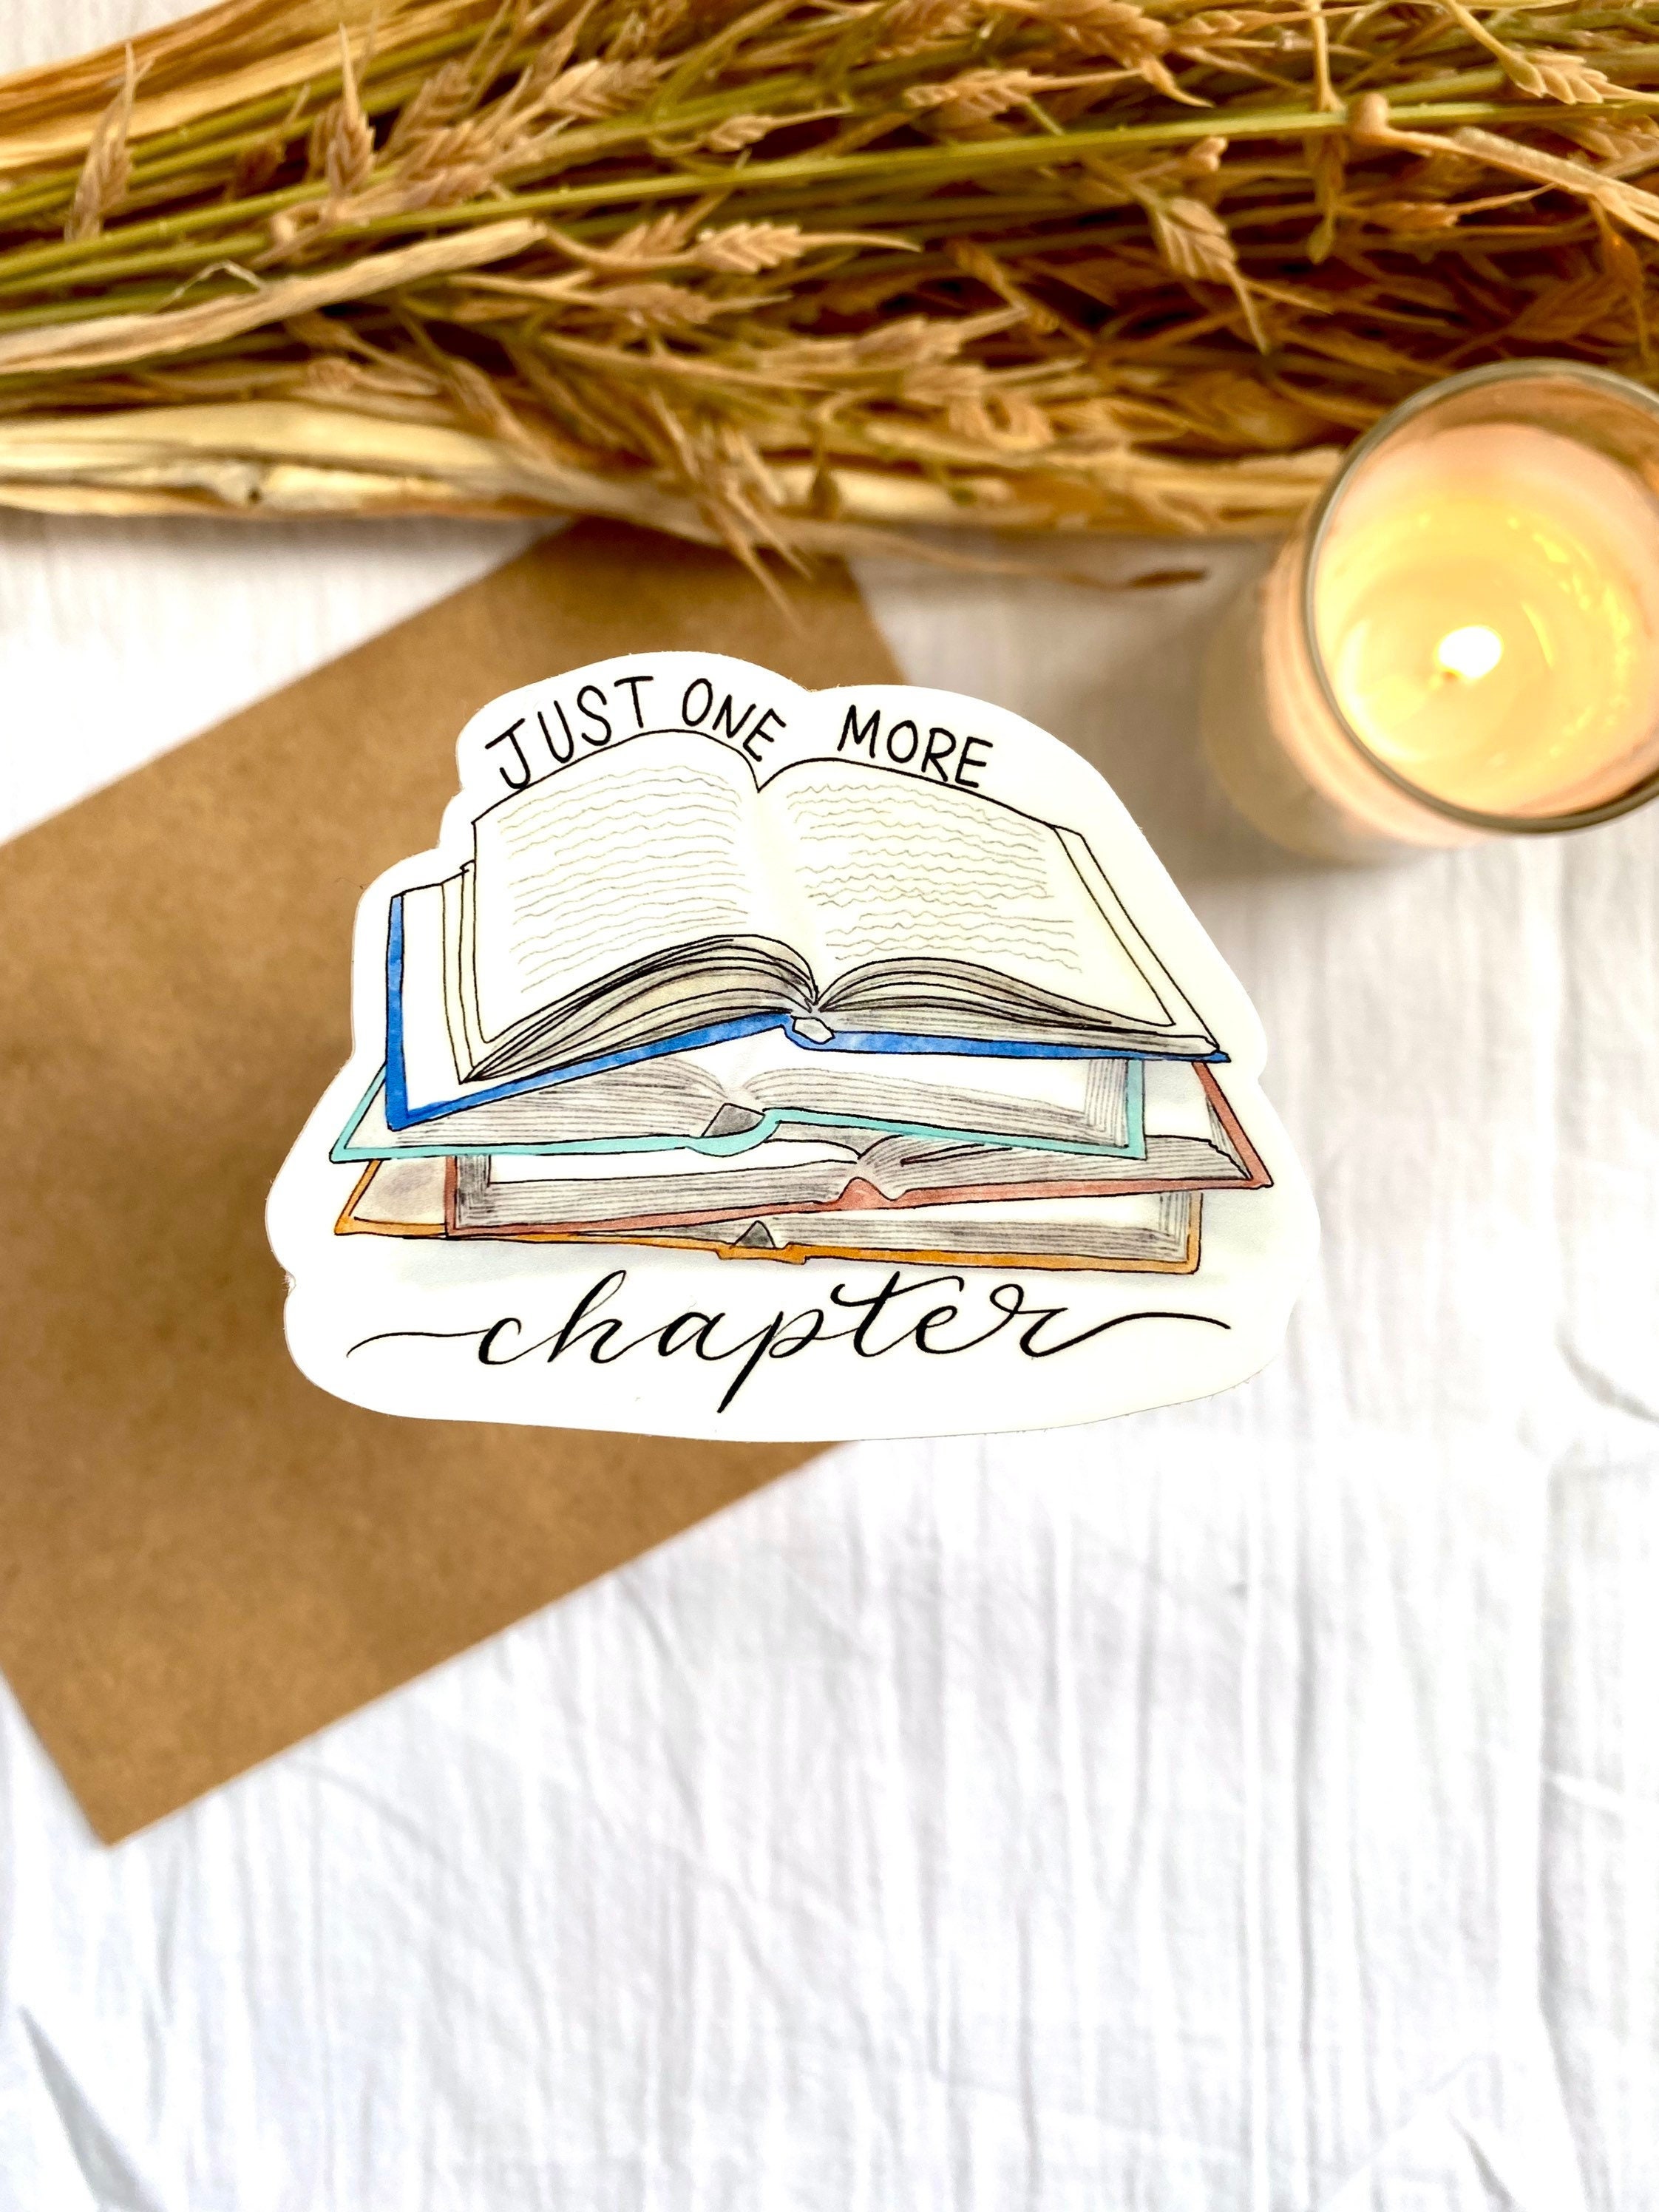 One More Chapter - Kindle Case Stickers Sticker for Sale by Mazekin